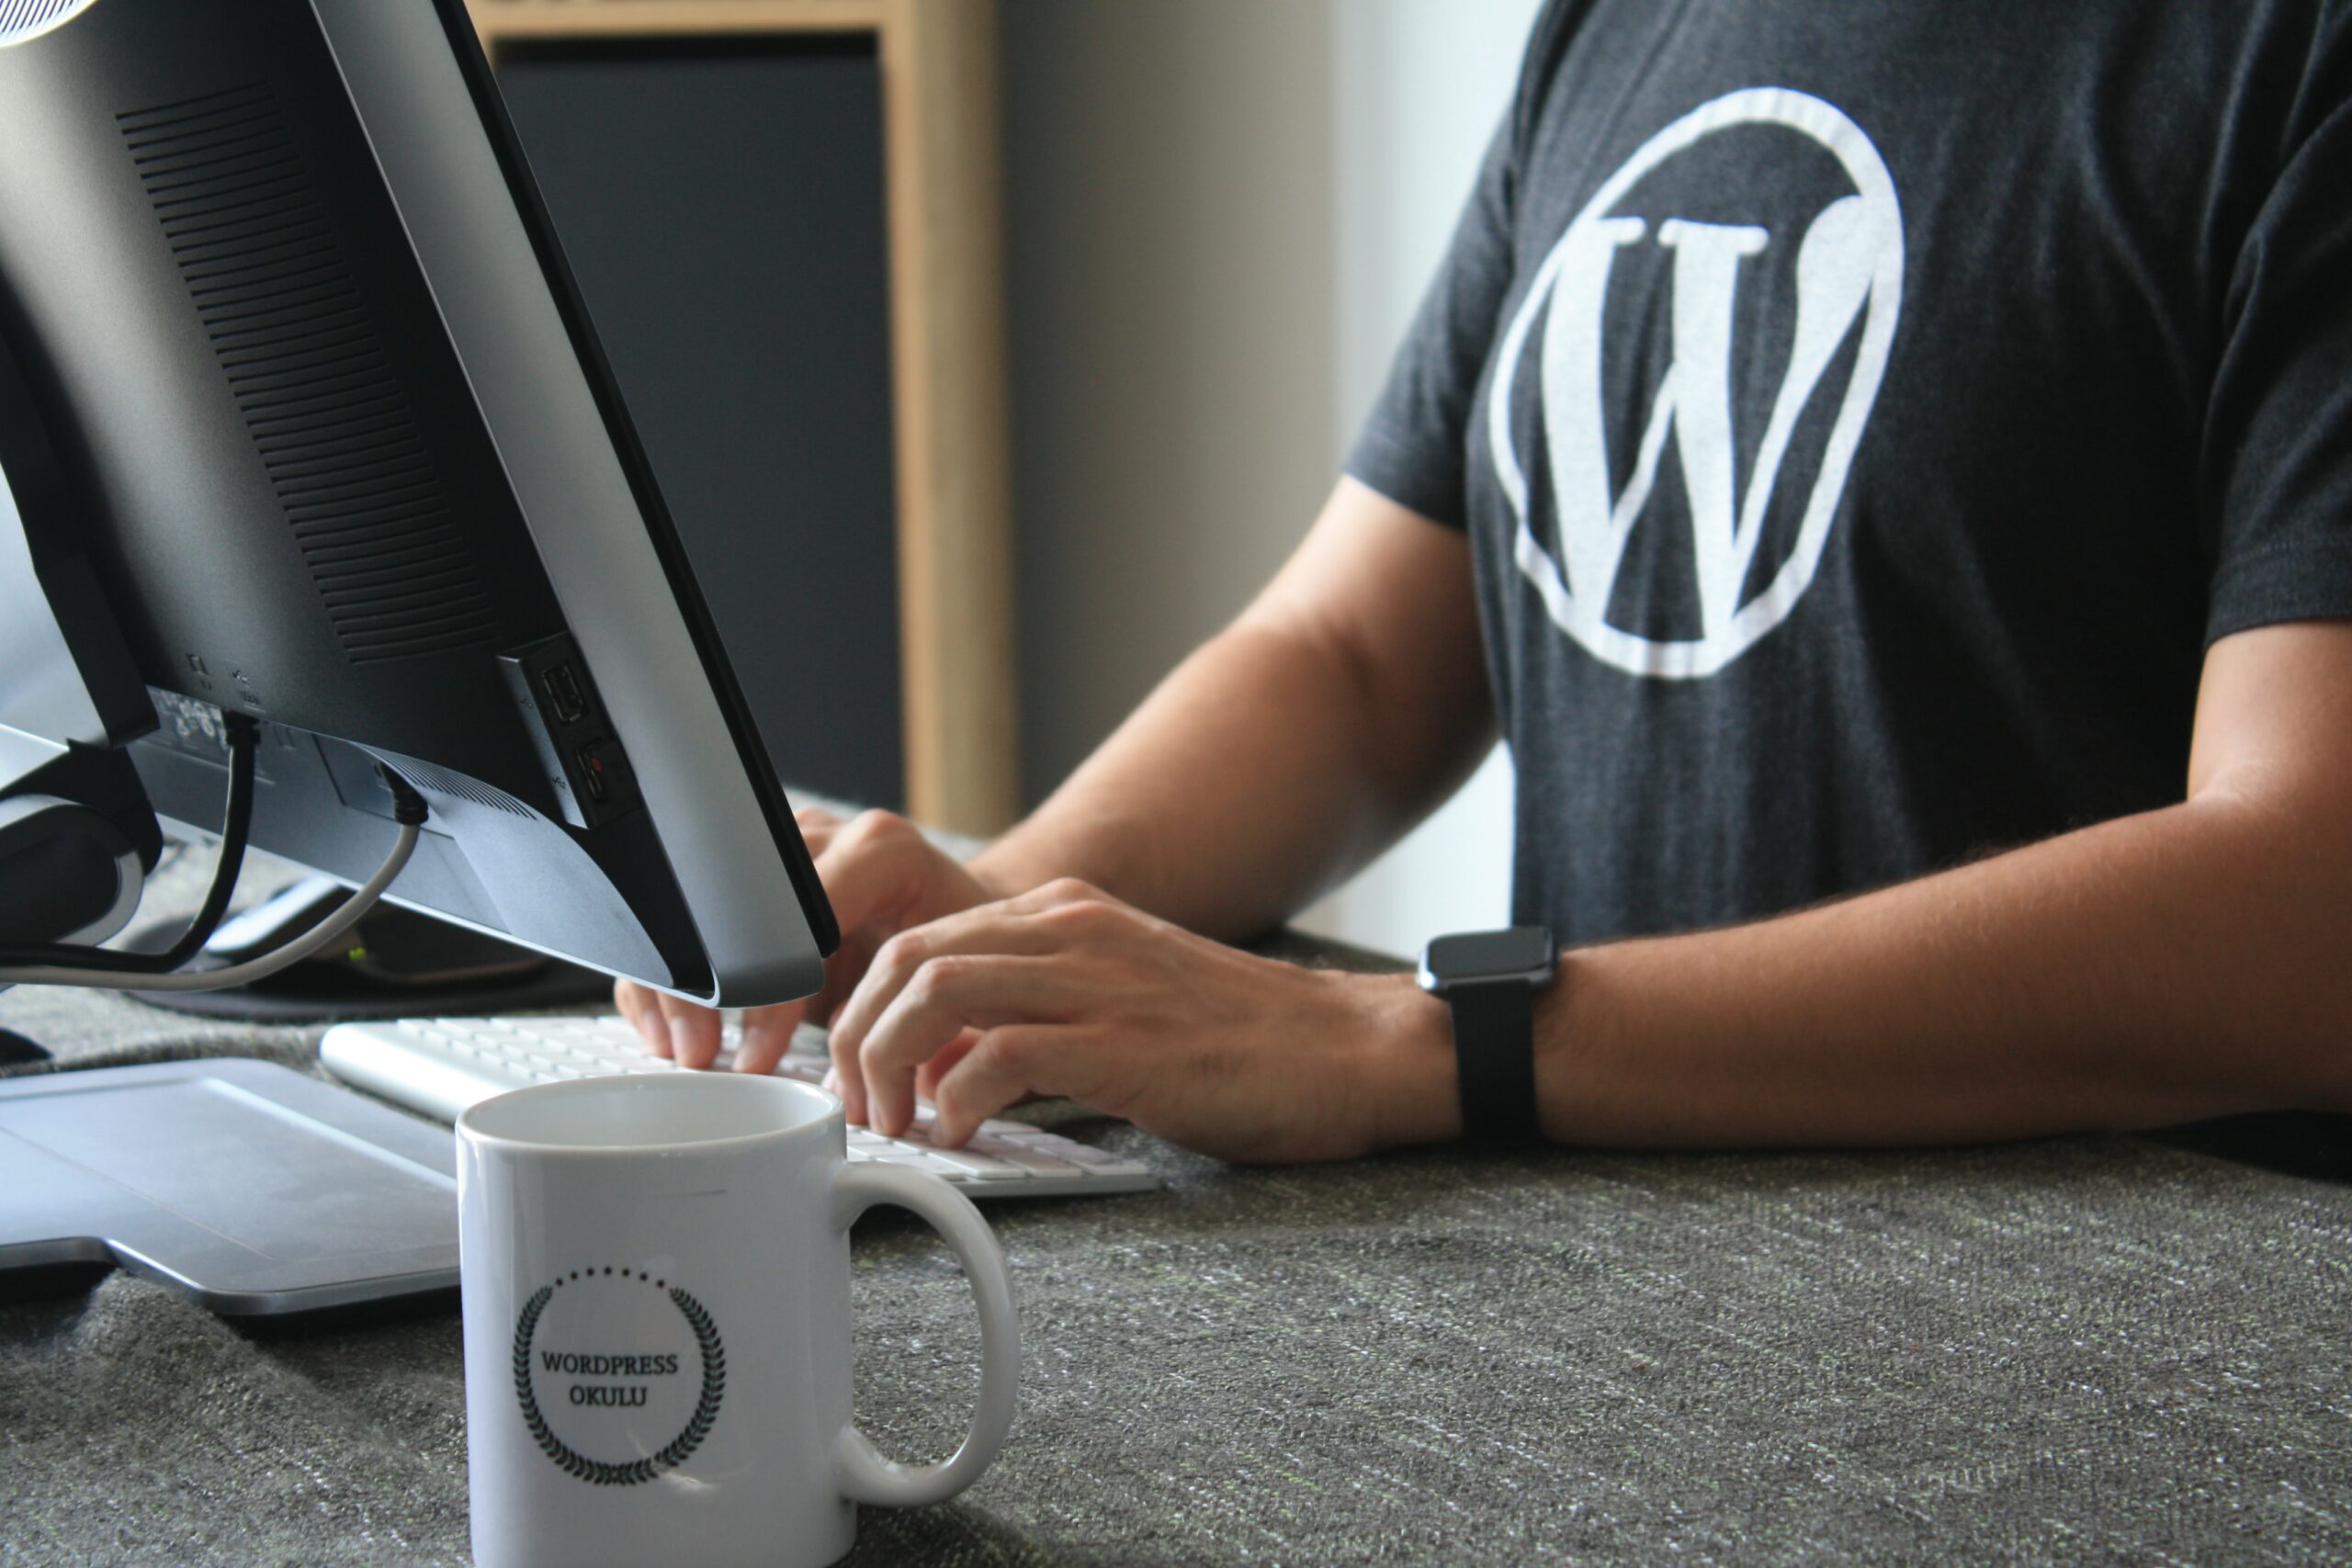 WordPress security scan: How to Scan a WordPress Site